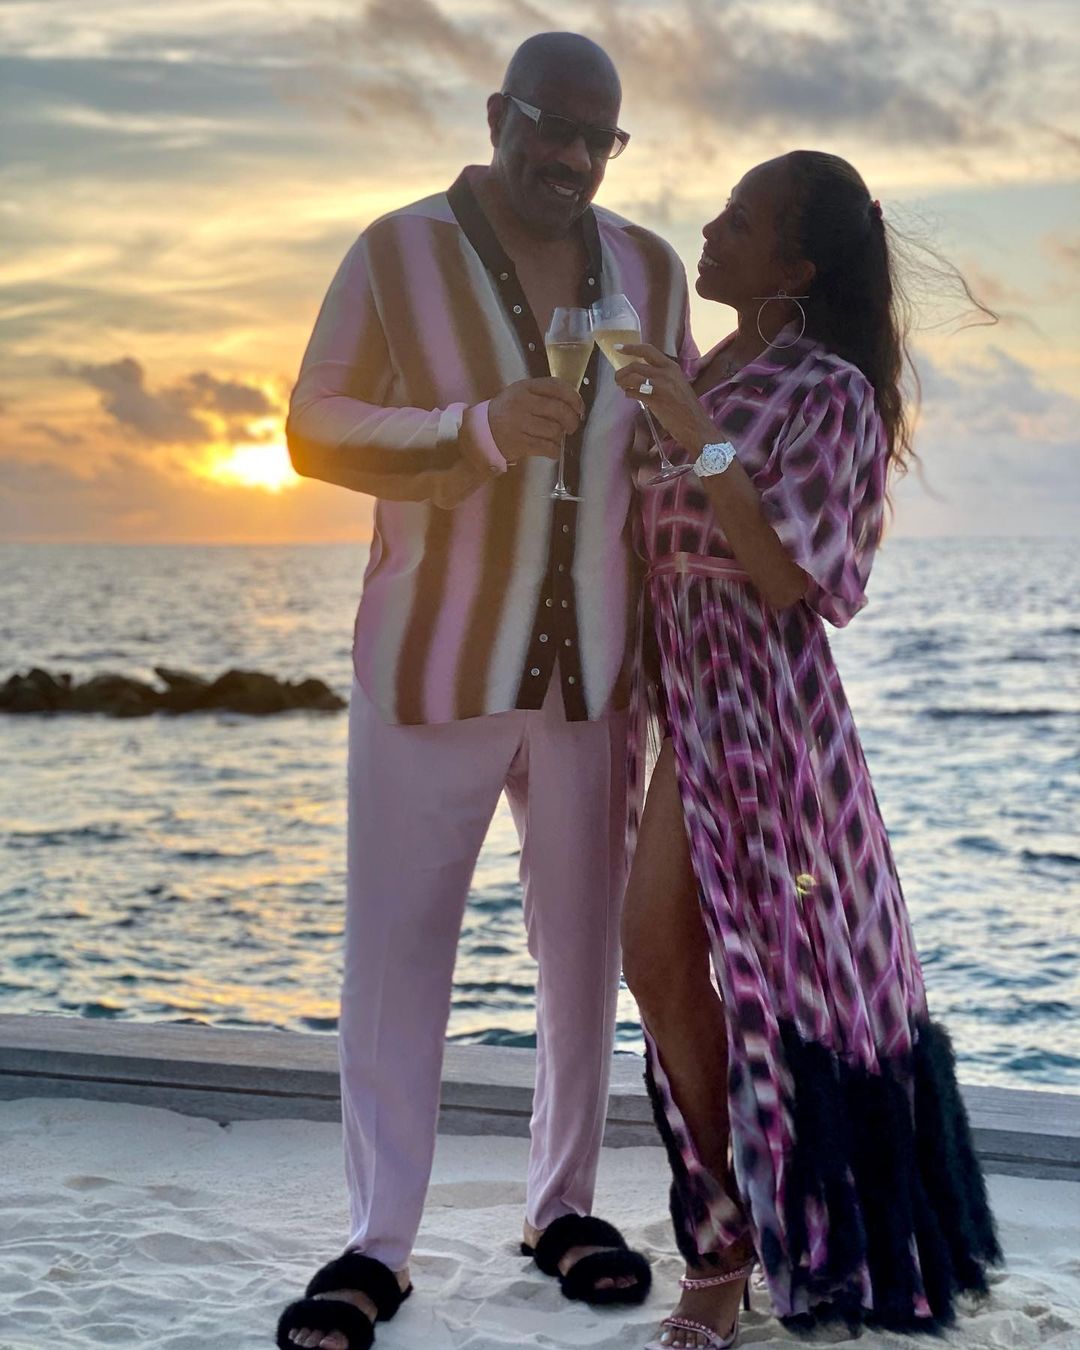 Steve & Majorie Harvey May Be The Most Stylish Couple On The